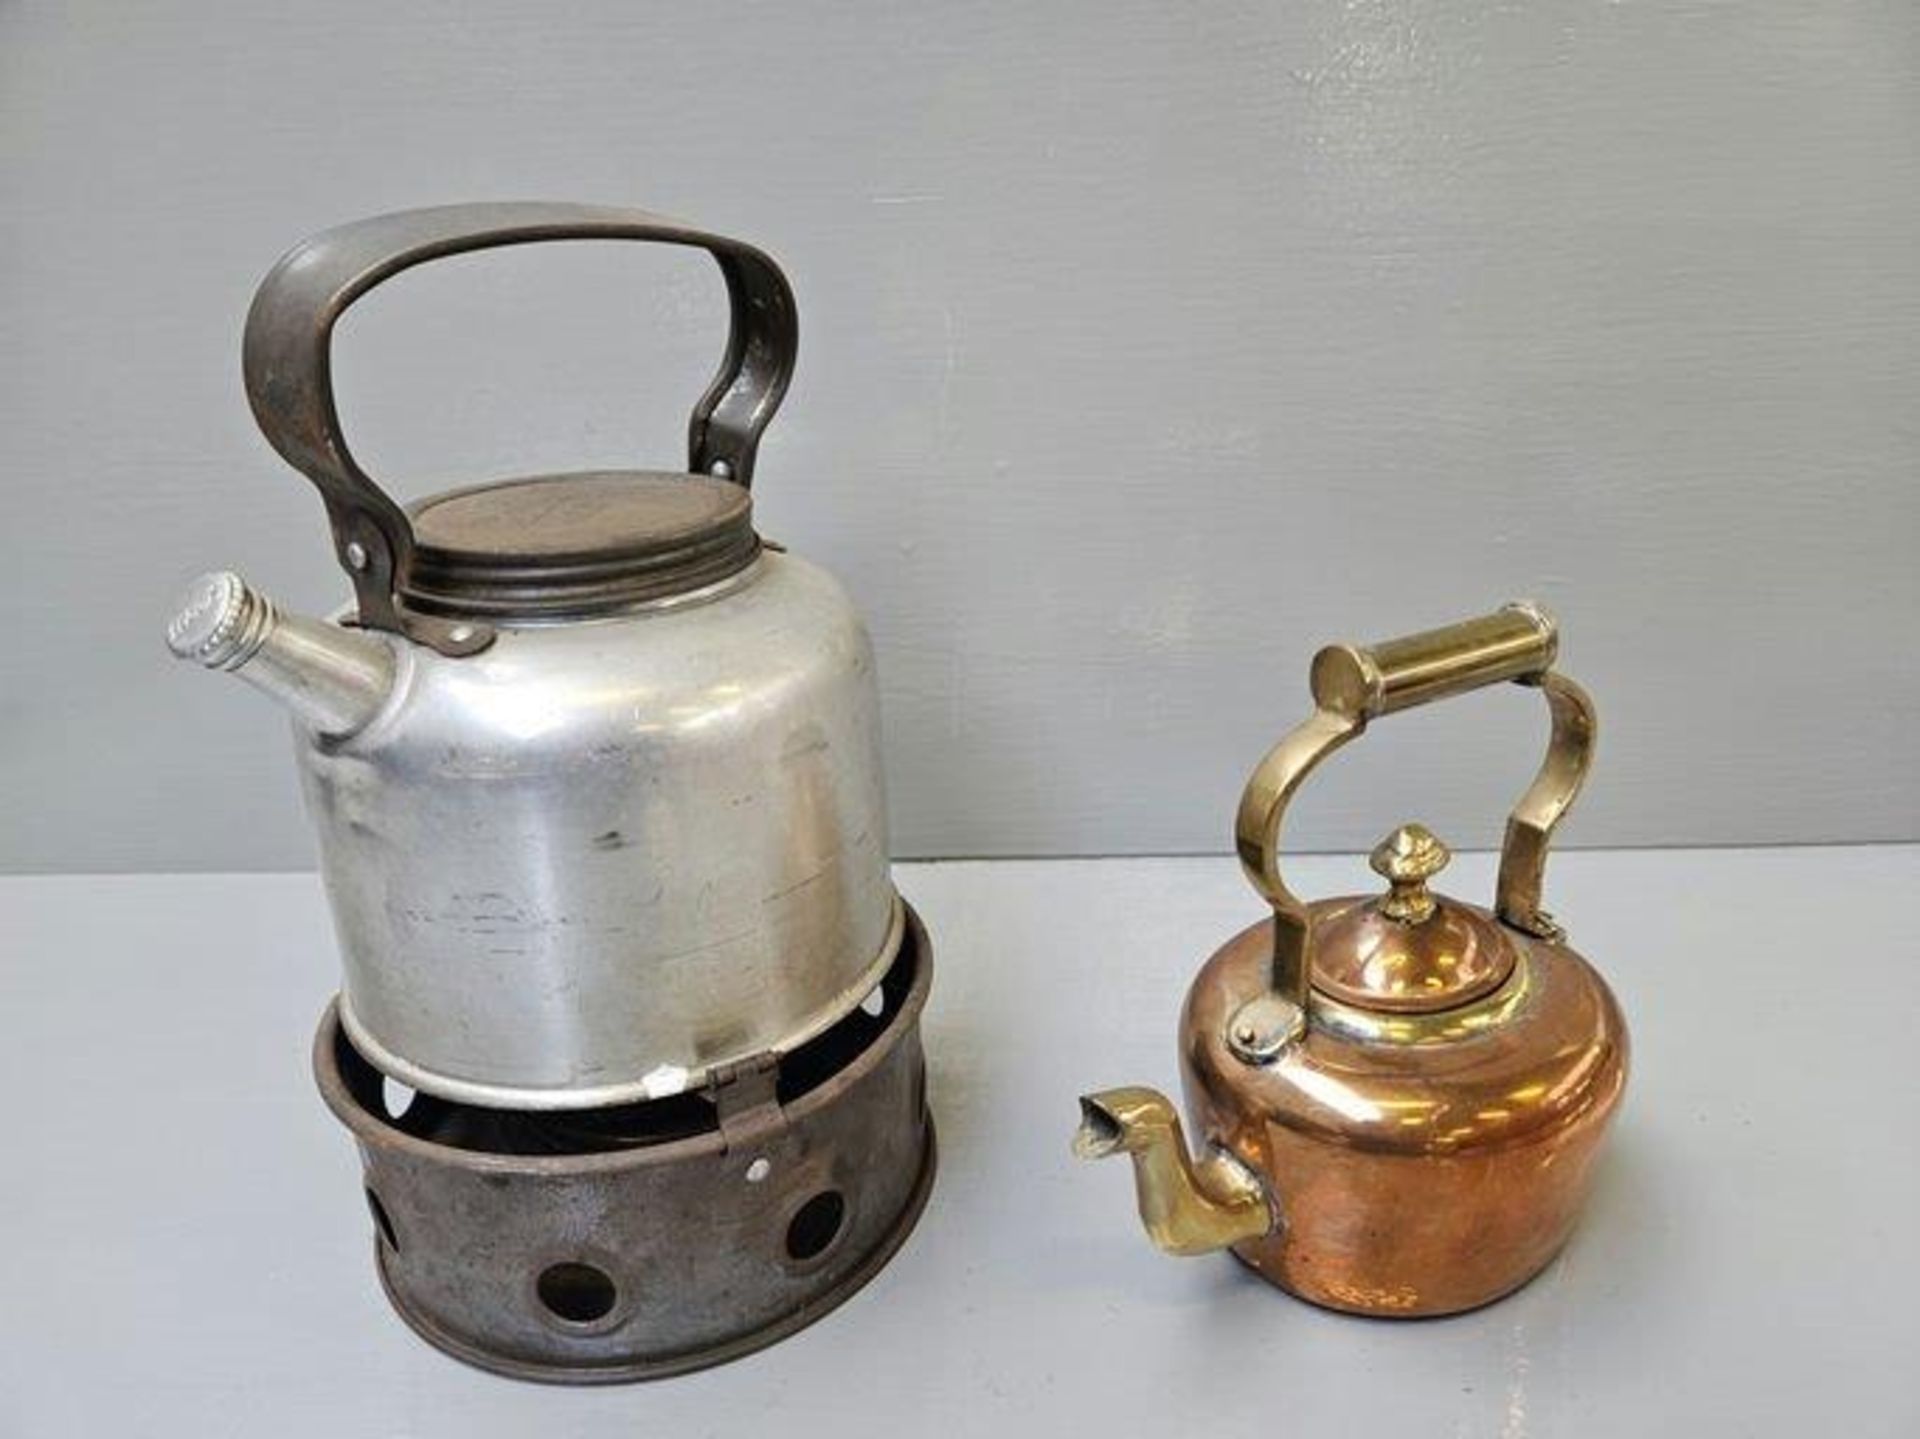 Sirram Camping Stove, Brass & Copper Kettle, 2 Old Bottles Etc